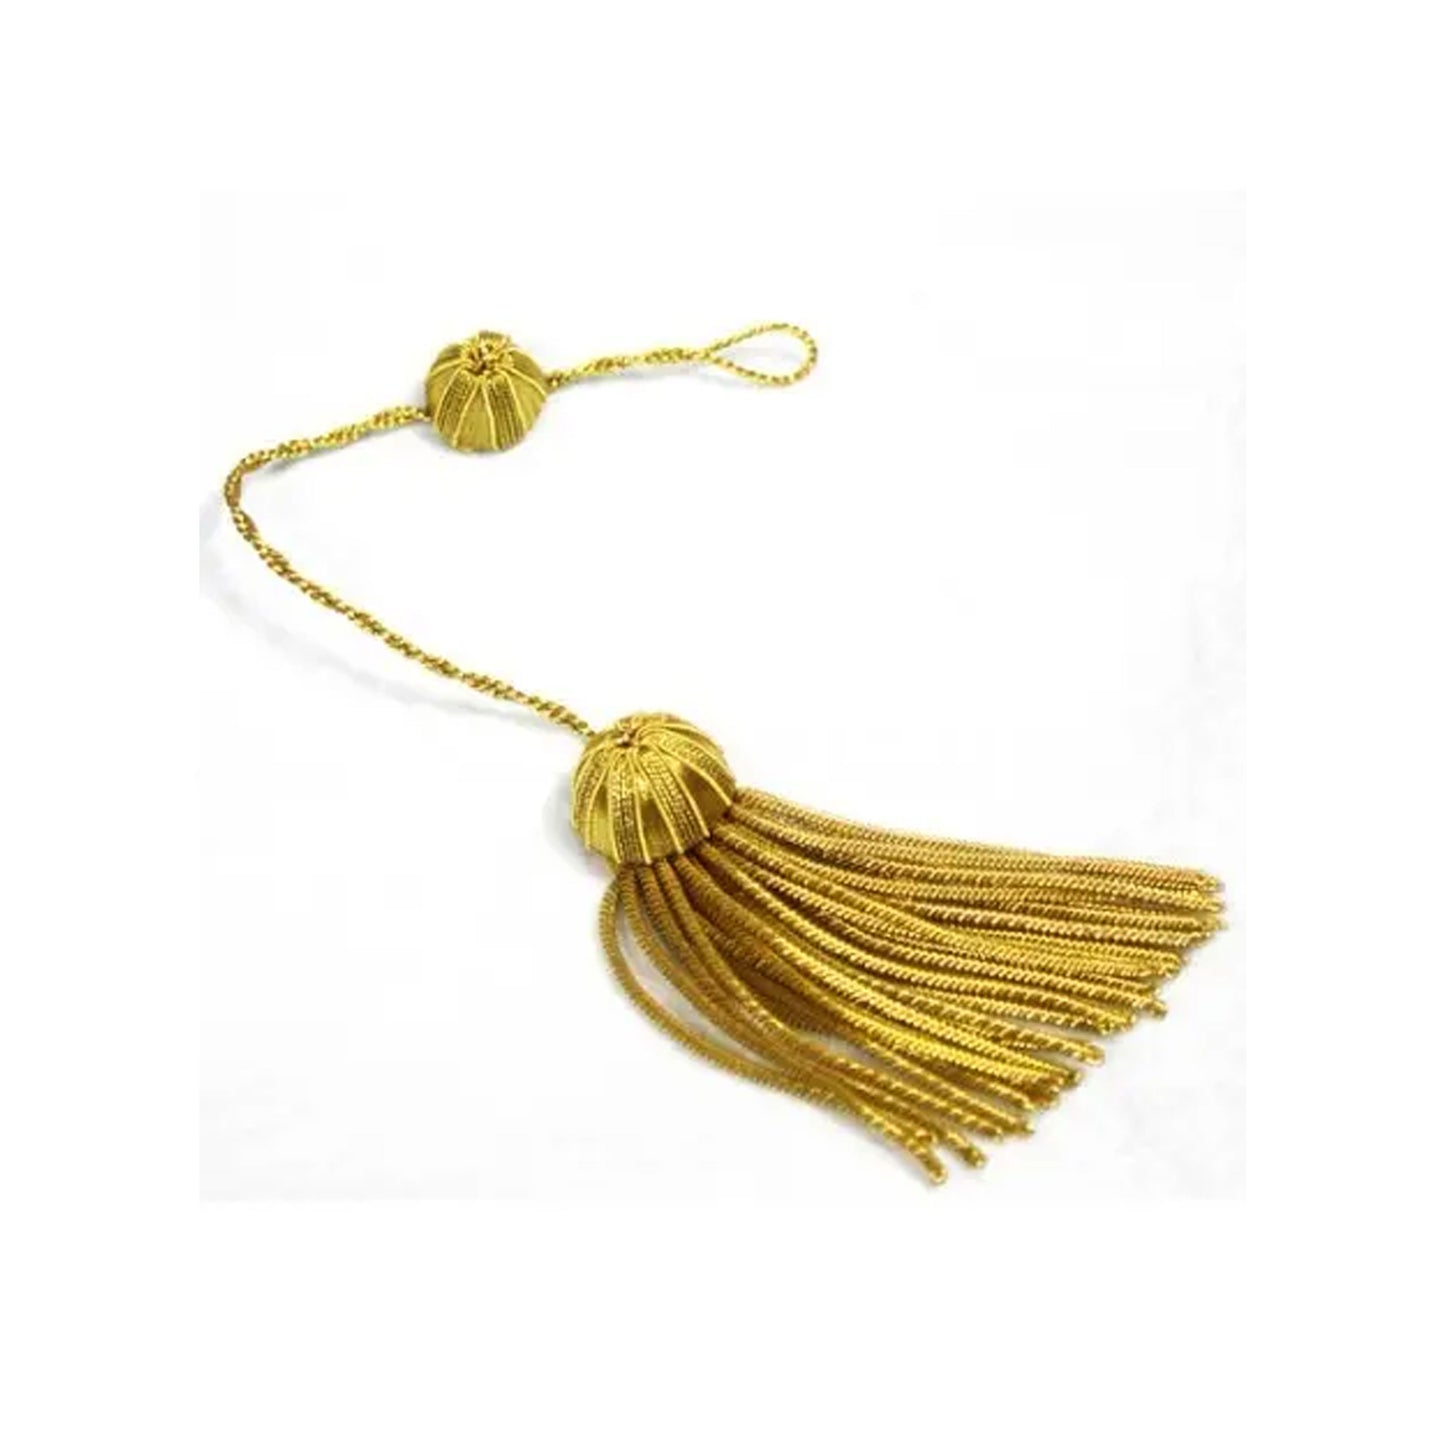 Deluxe Doctoral Graduation Tam with Gold Bullion Tassel in Various Colors and Styles (4/6/8 Sided)-CA graduation